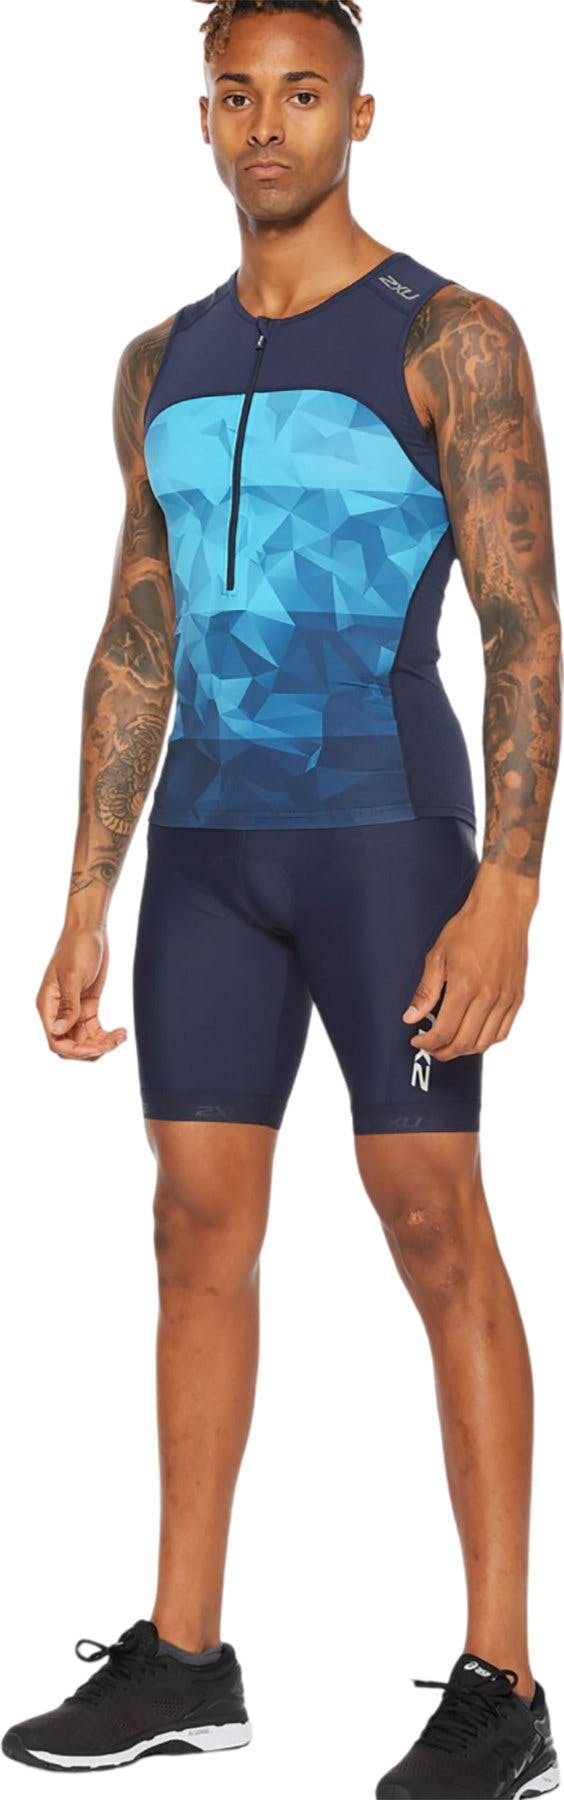 Product image for Active Tri Singlet - Men's